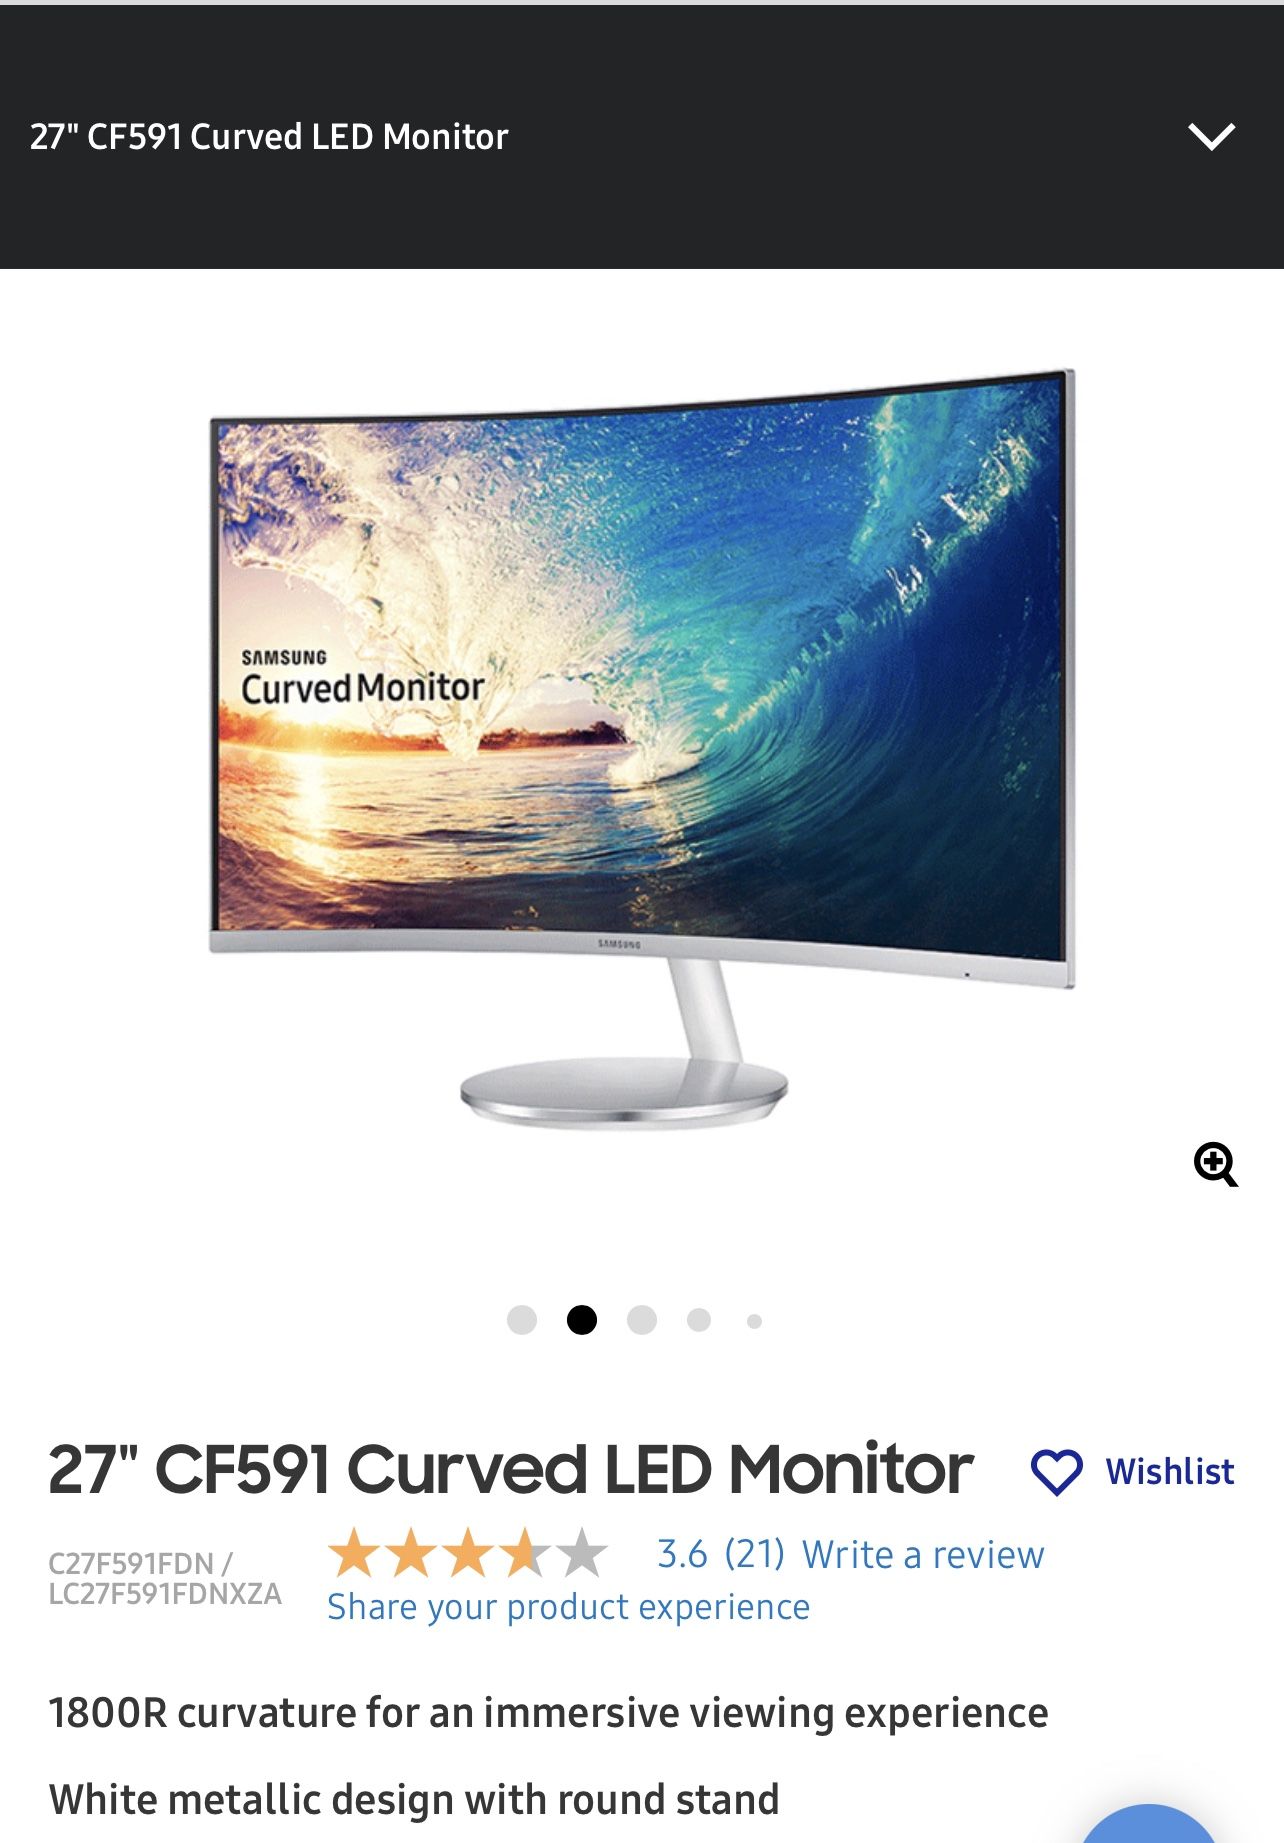 Samsung 27” Curved LED Monitor